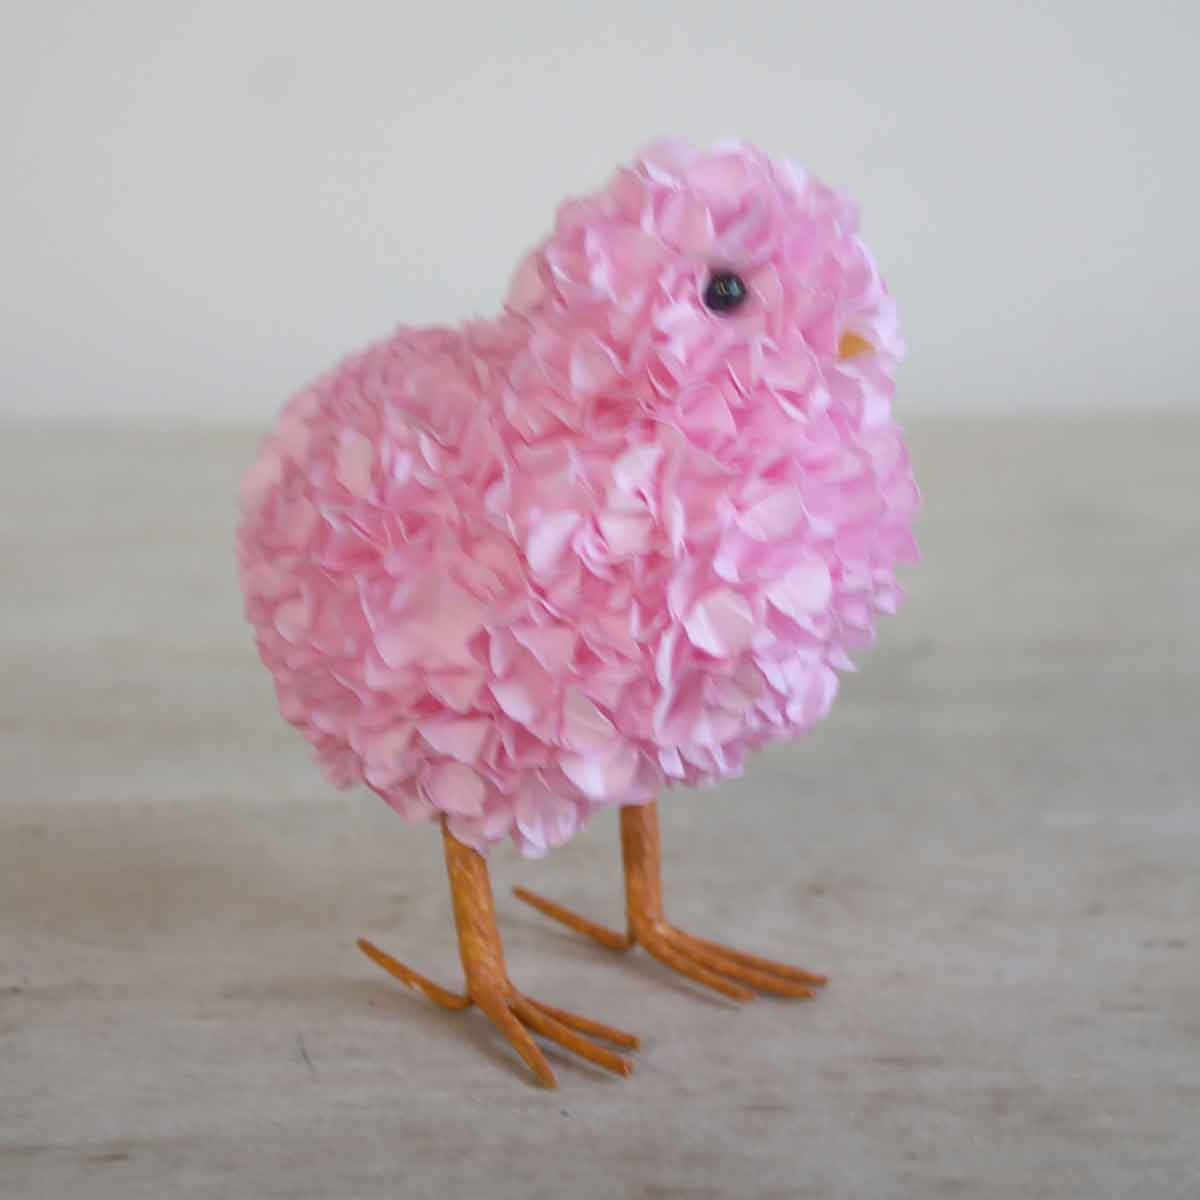 Season and Stir™ Hydrangea Chicks for your tabletops!